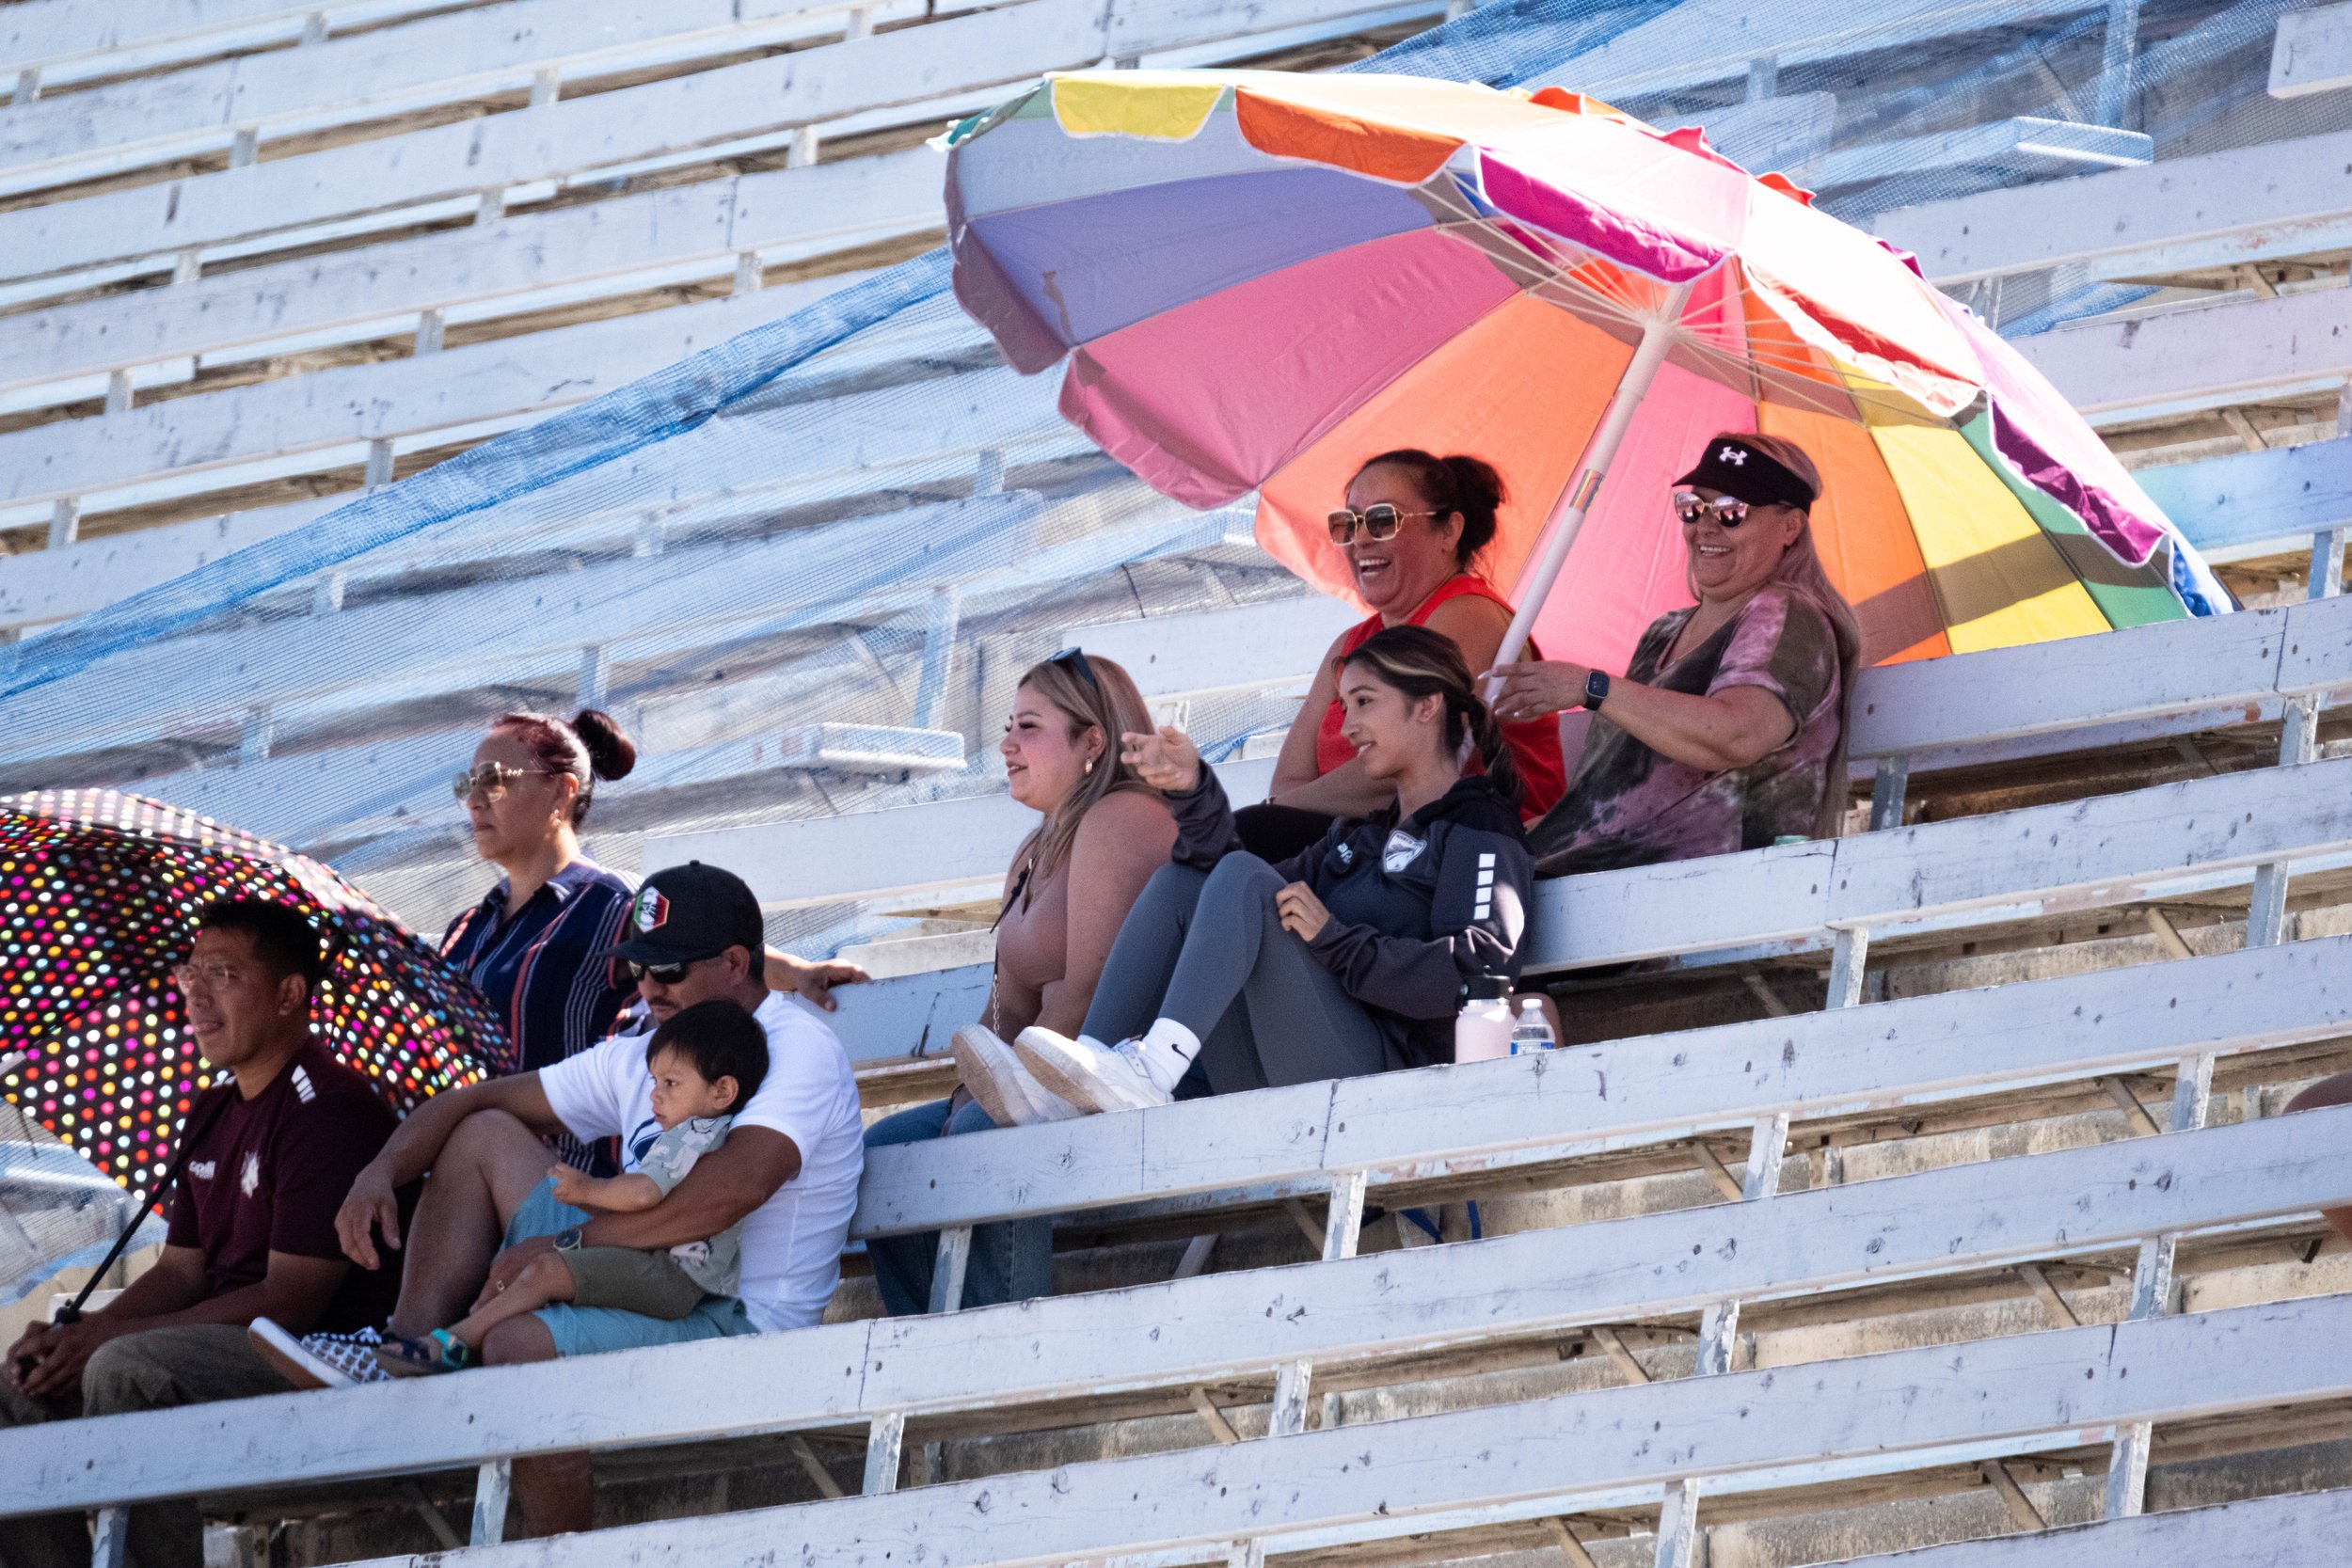  Norco College soccer supporters watching the team play against Santa Monica College on Tue. Sept. 12 on Corsair Field at Santa Monica, Calif. (Danilo Perez | The Corsair) 